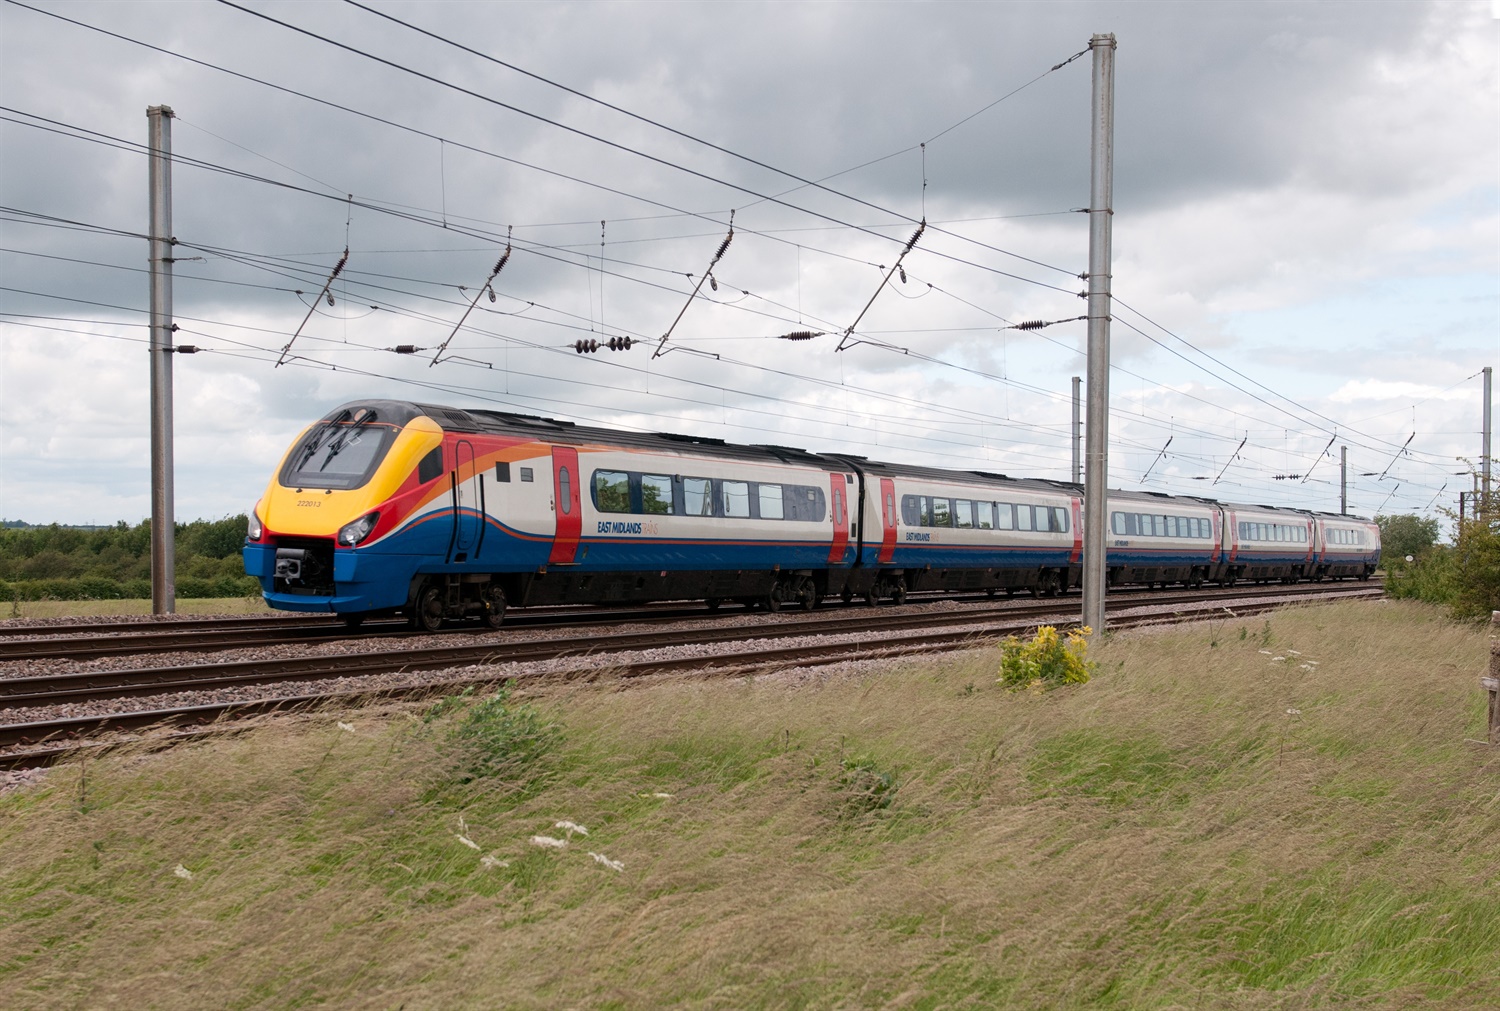 NR publishes East Midlands route study